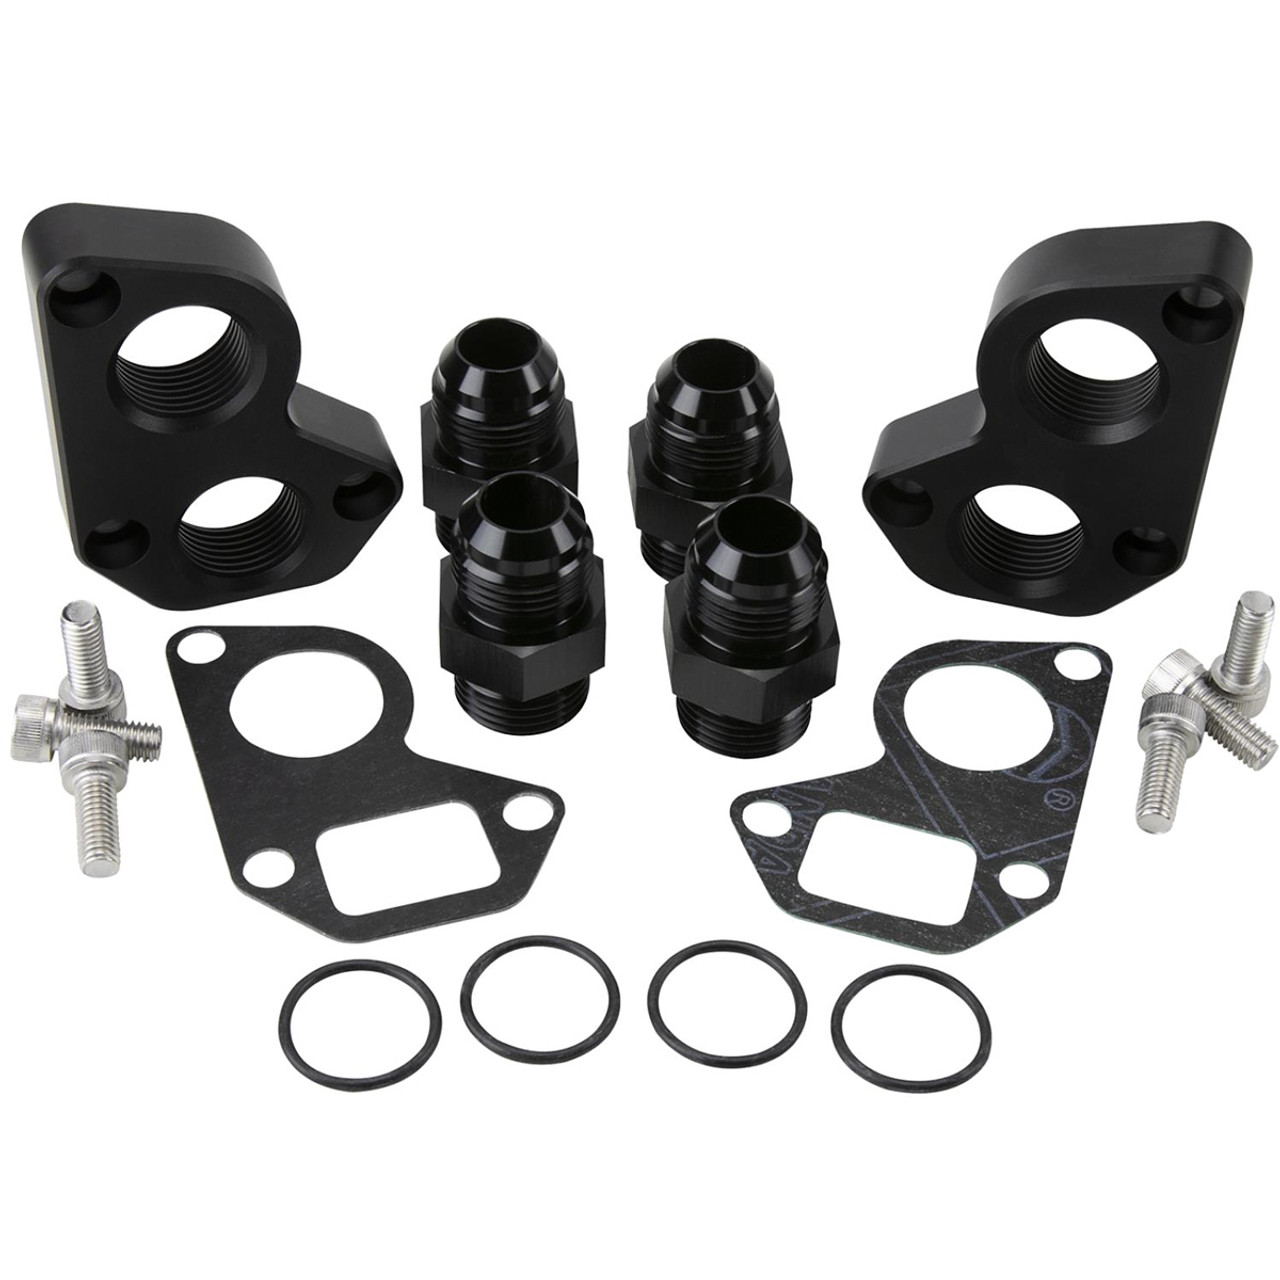 LS Engine Remote Water Pump Adapters